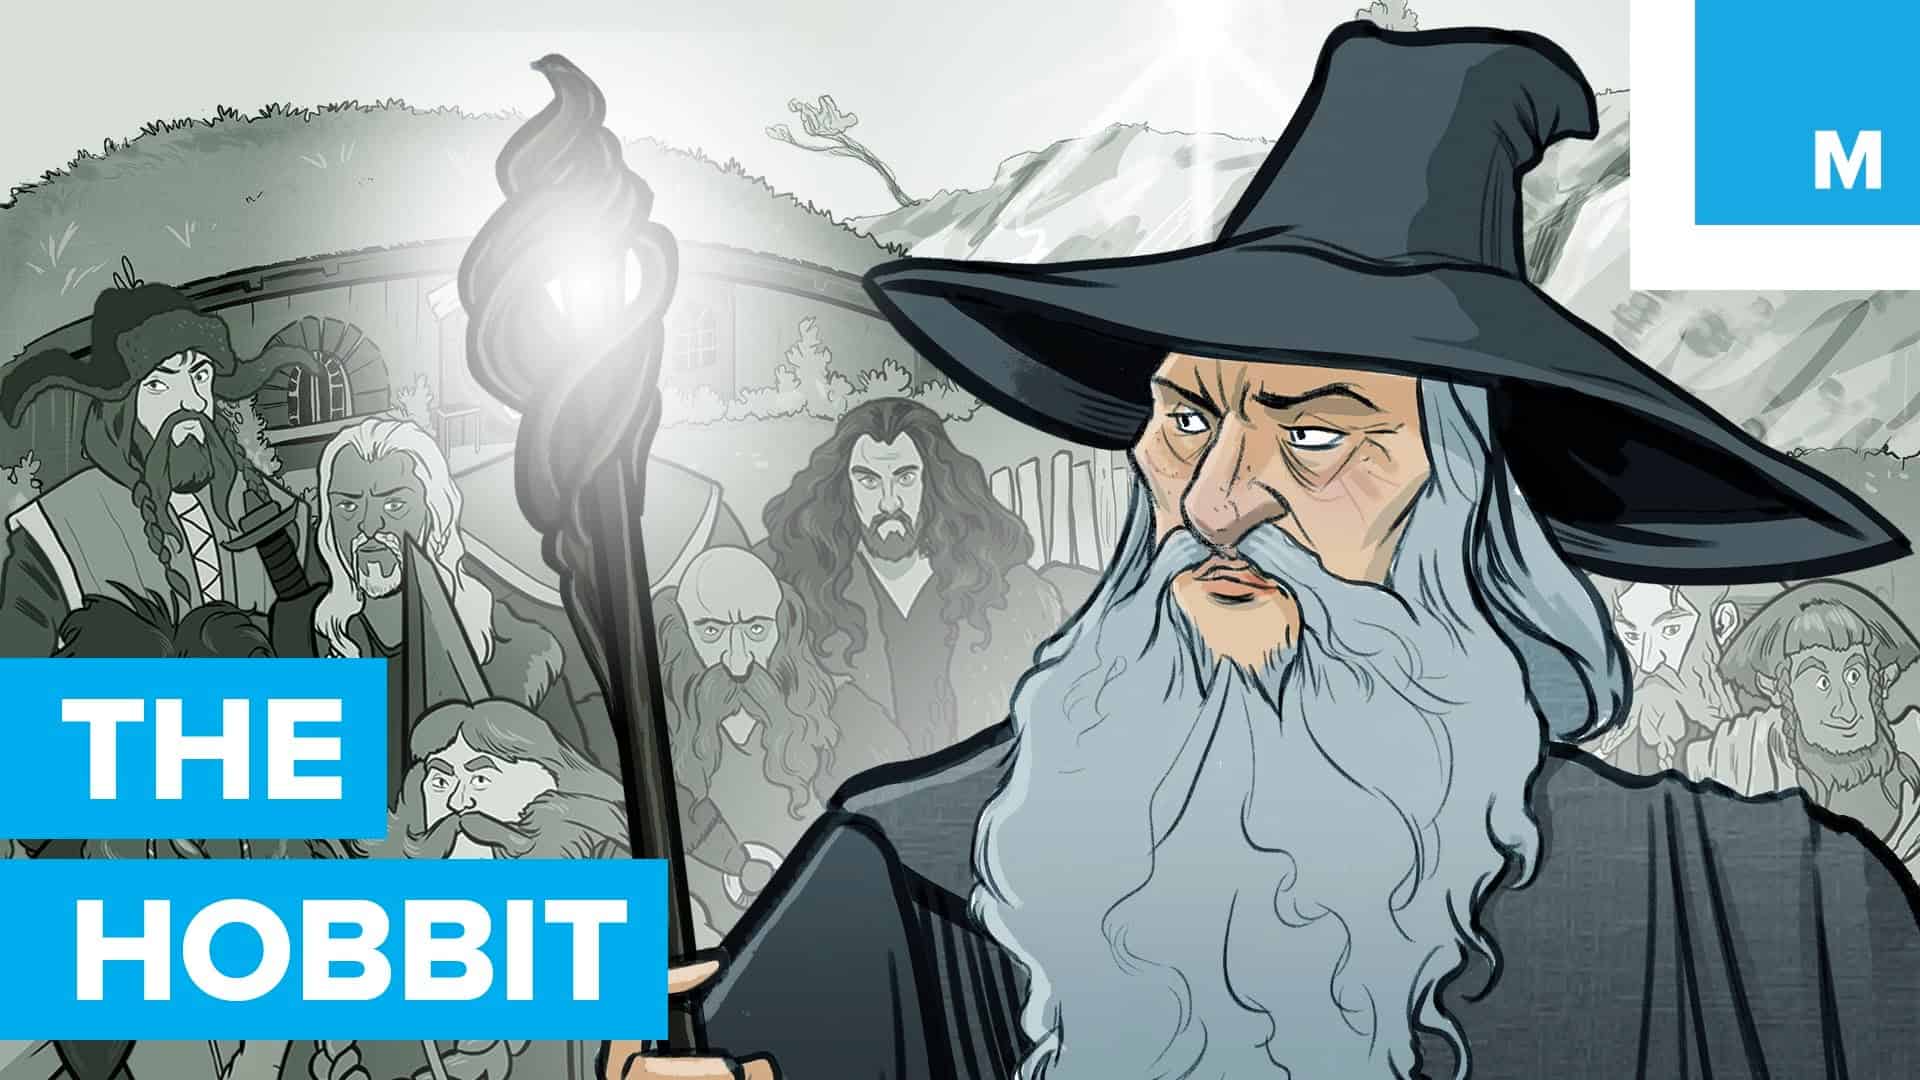 The hobbit in less than three minutes